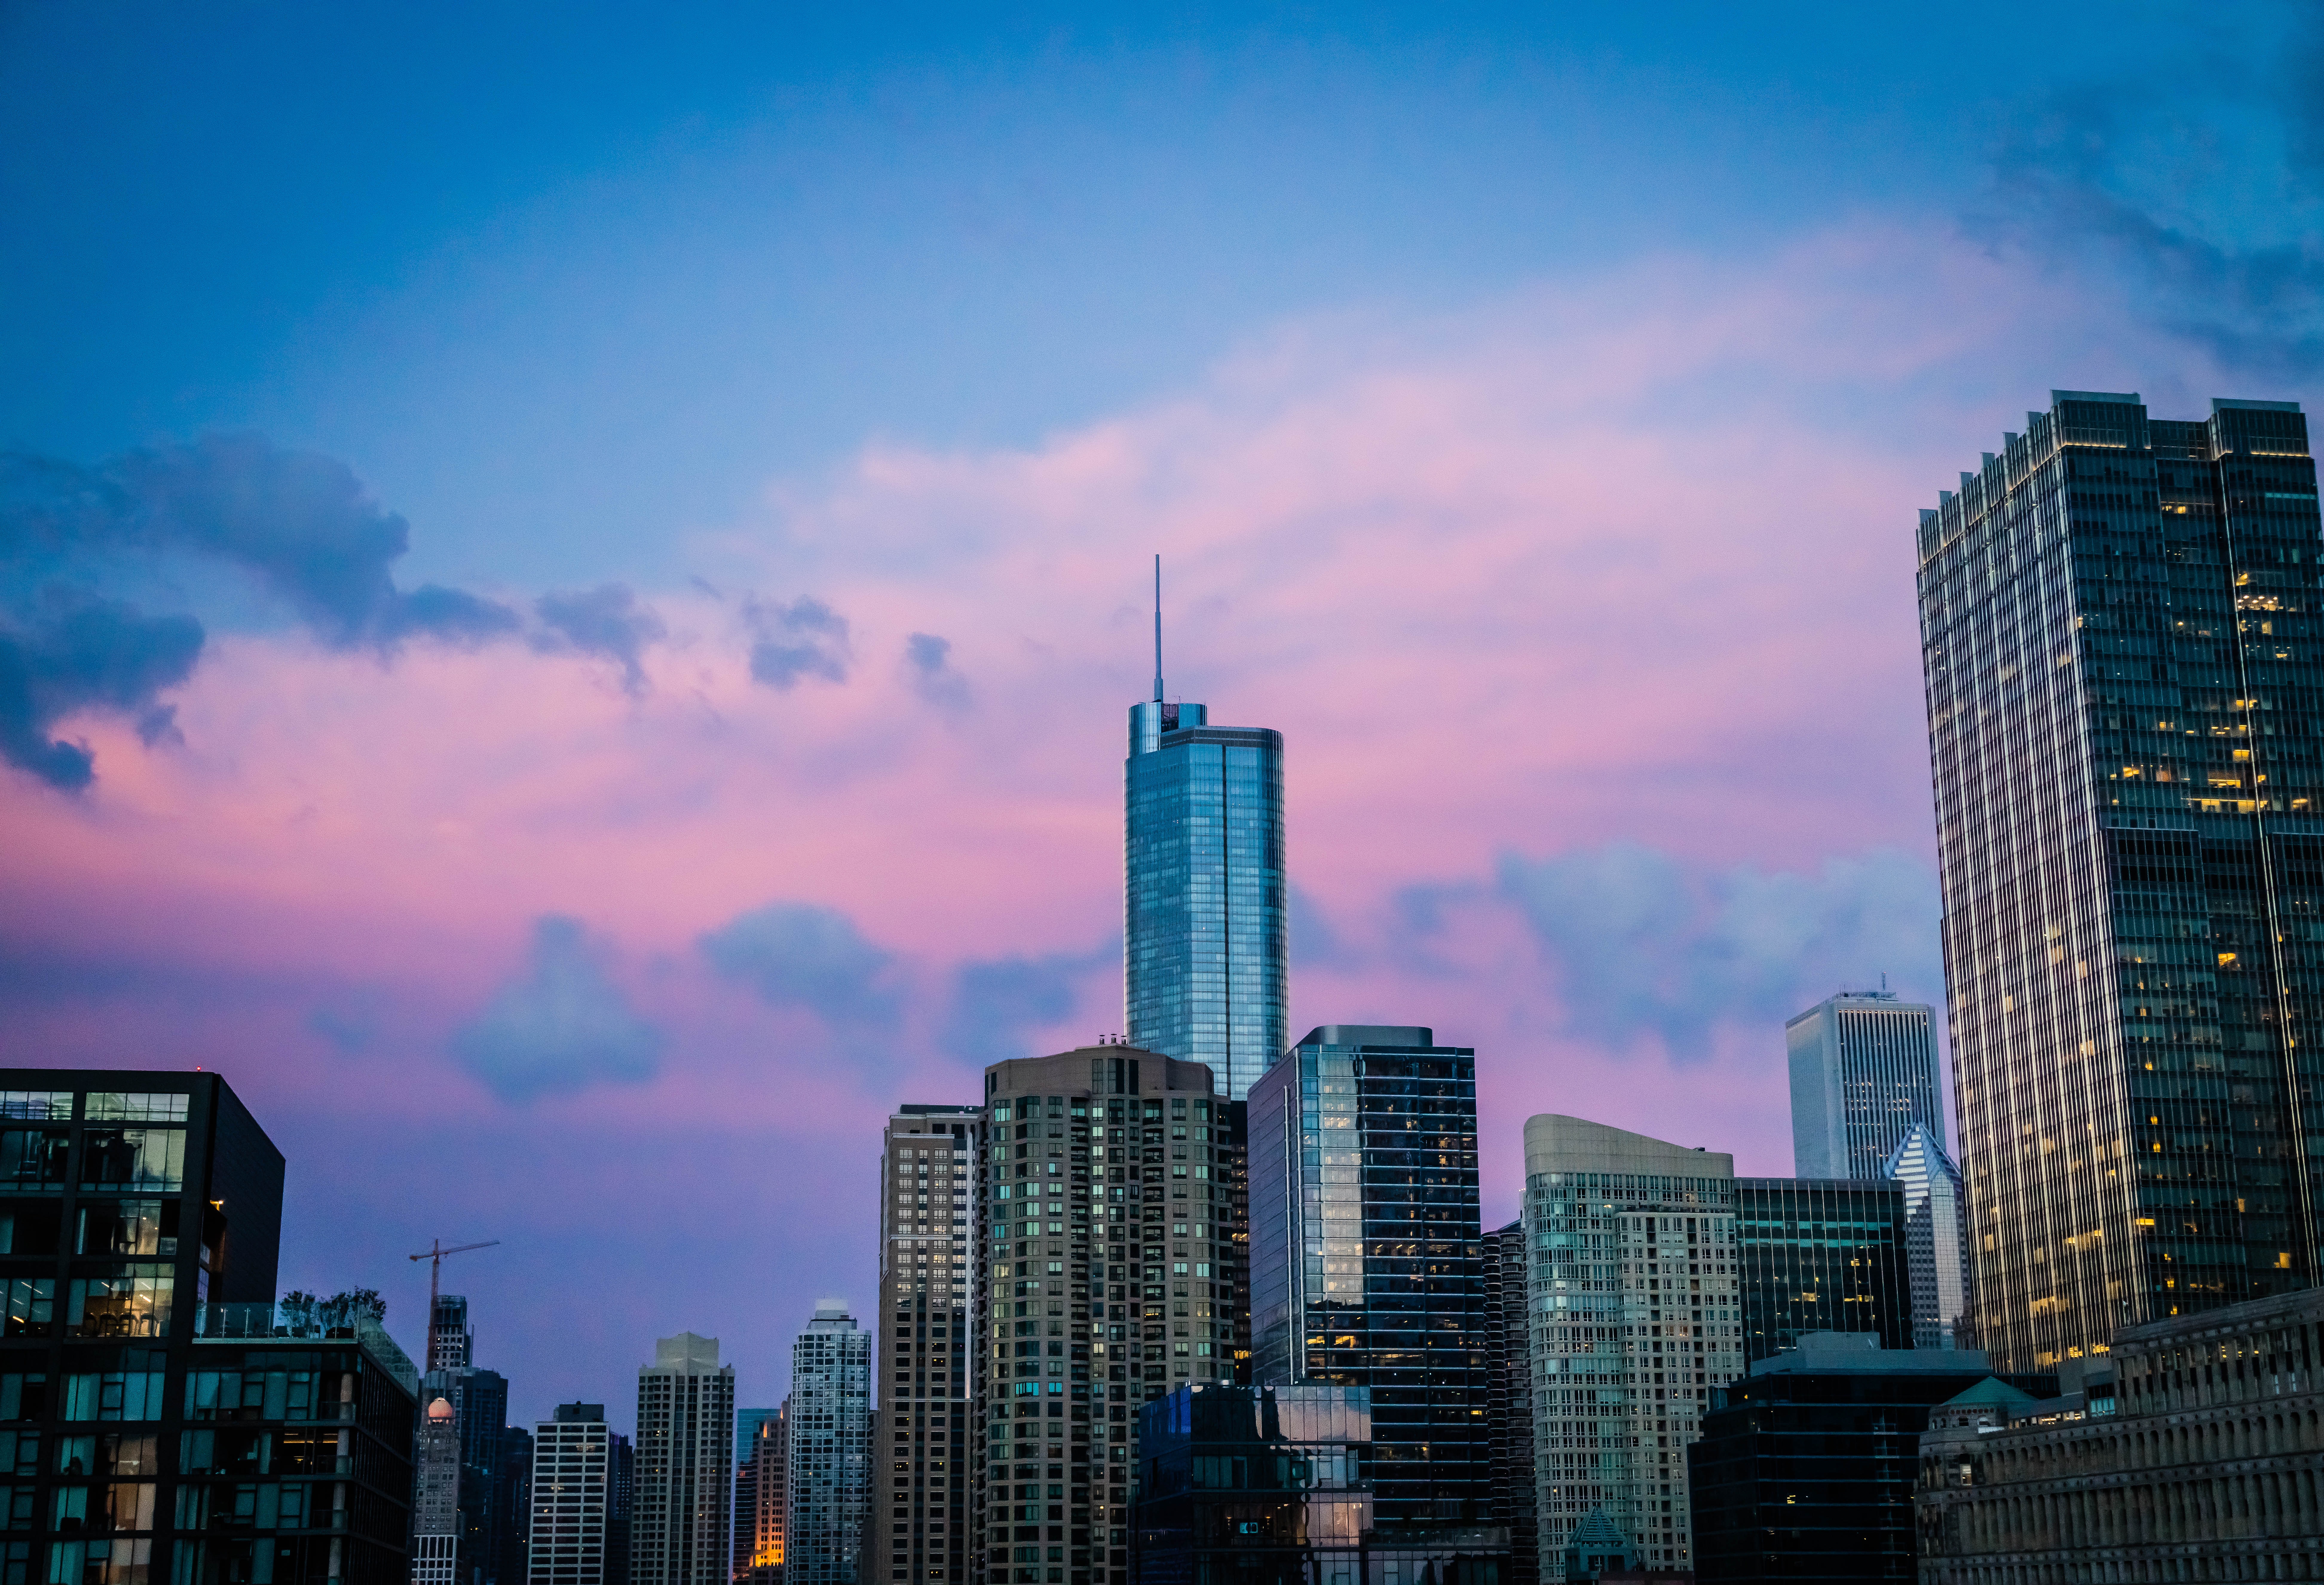 united states, cities, sunset, architecture, usa, city, skyscraper, chicago